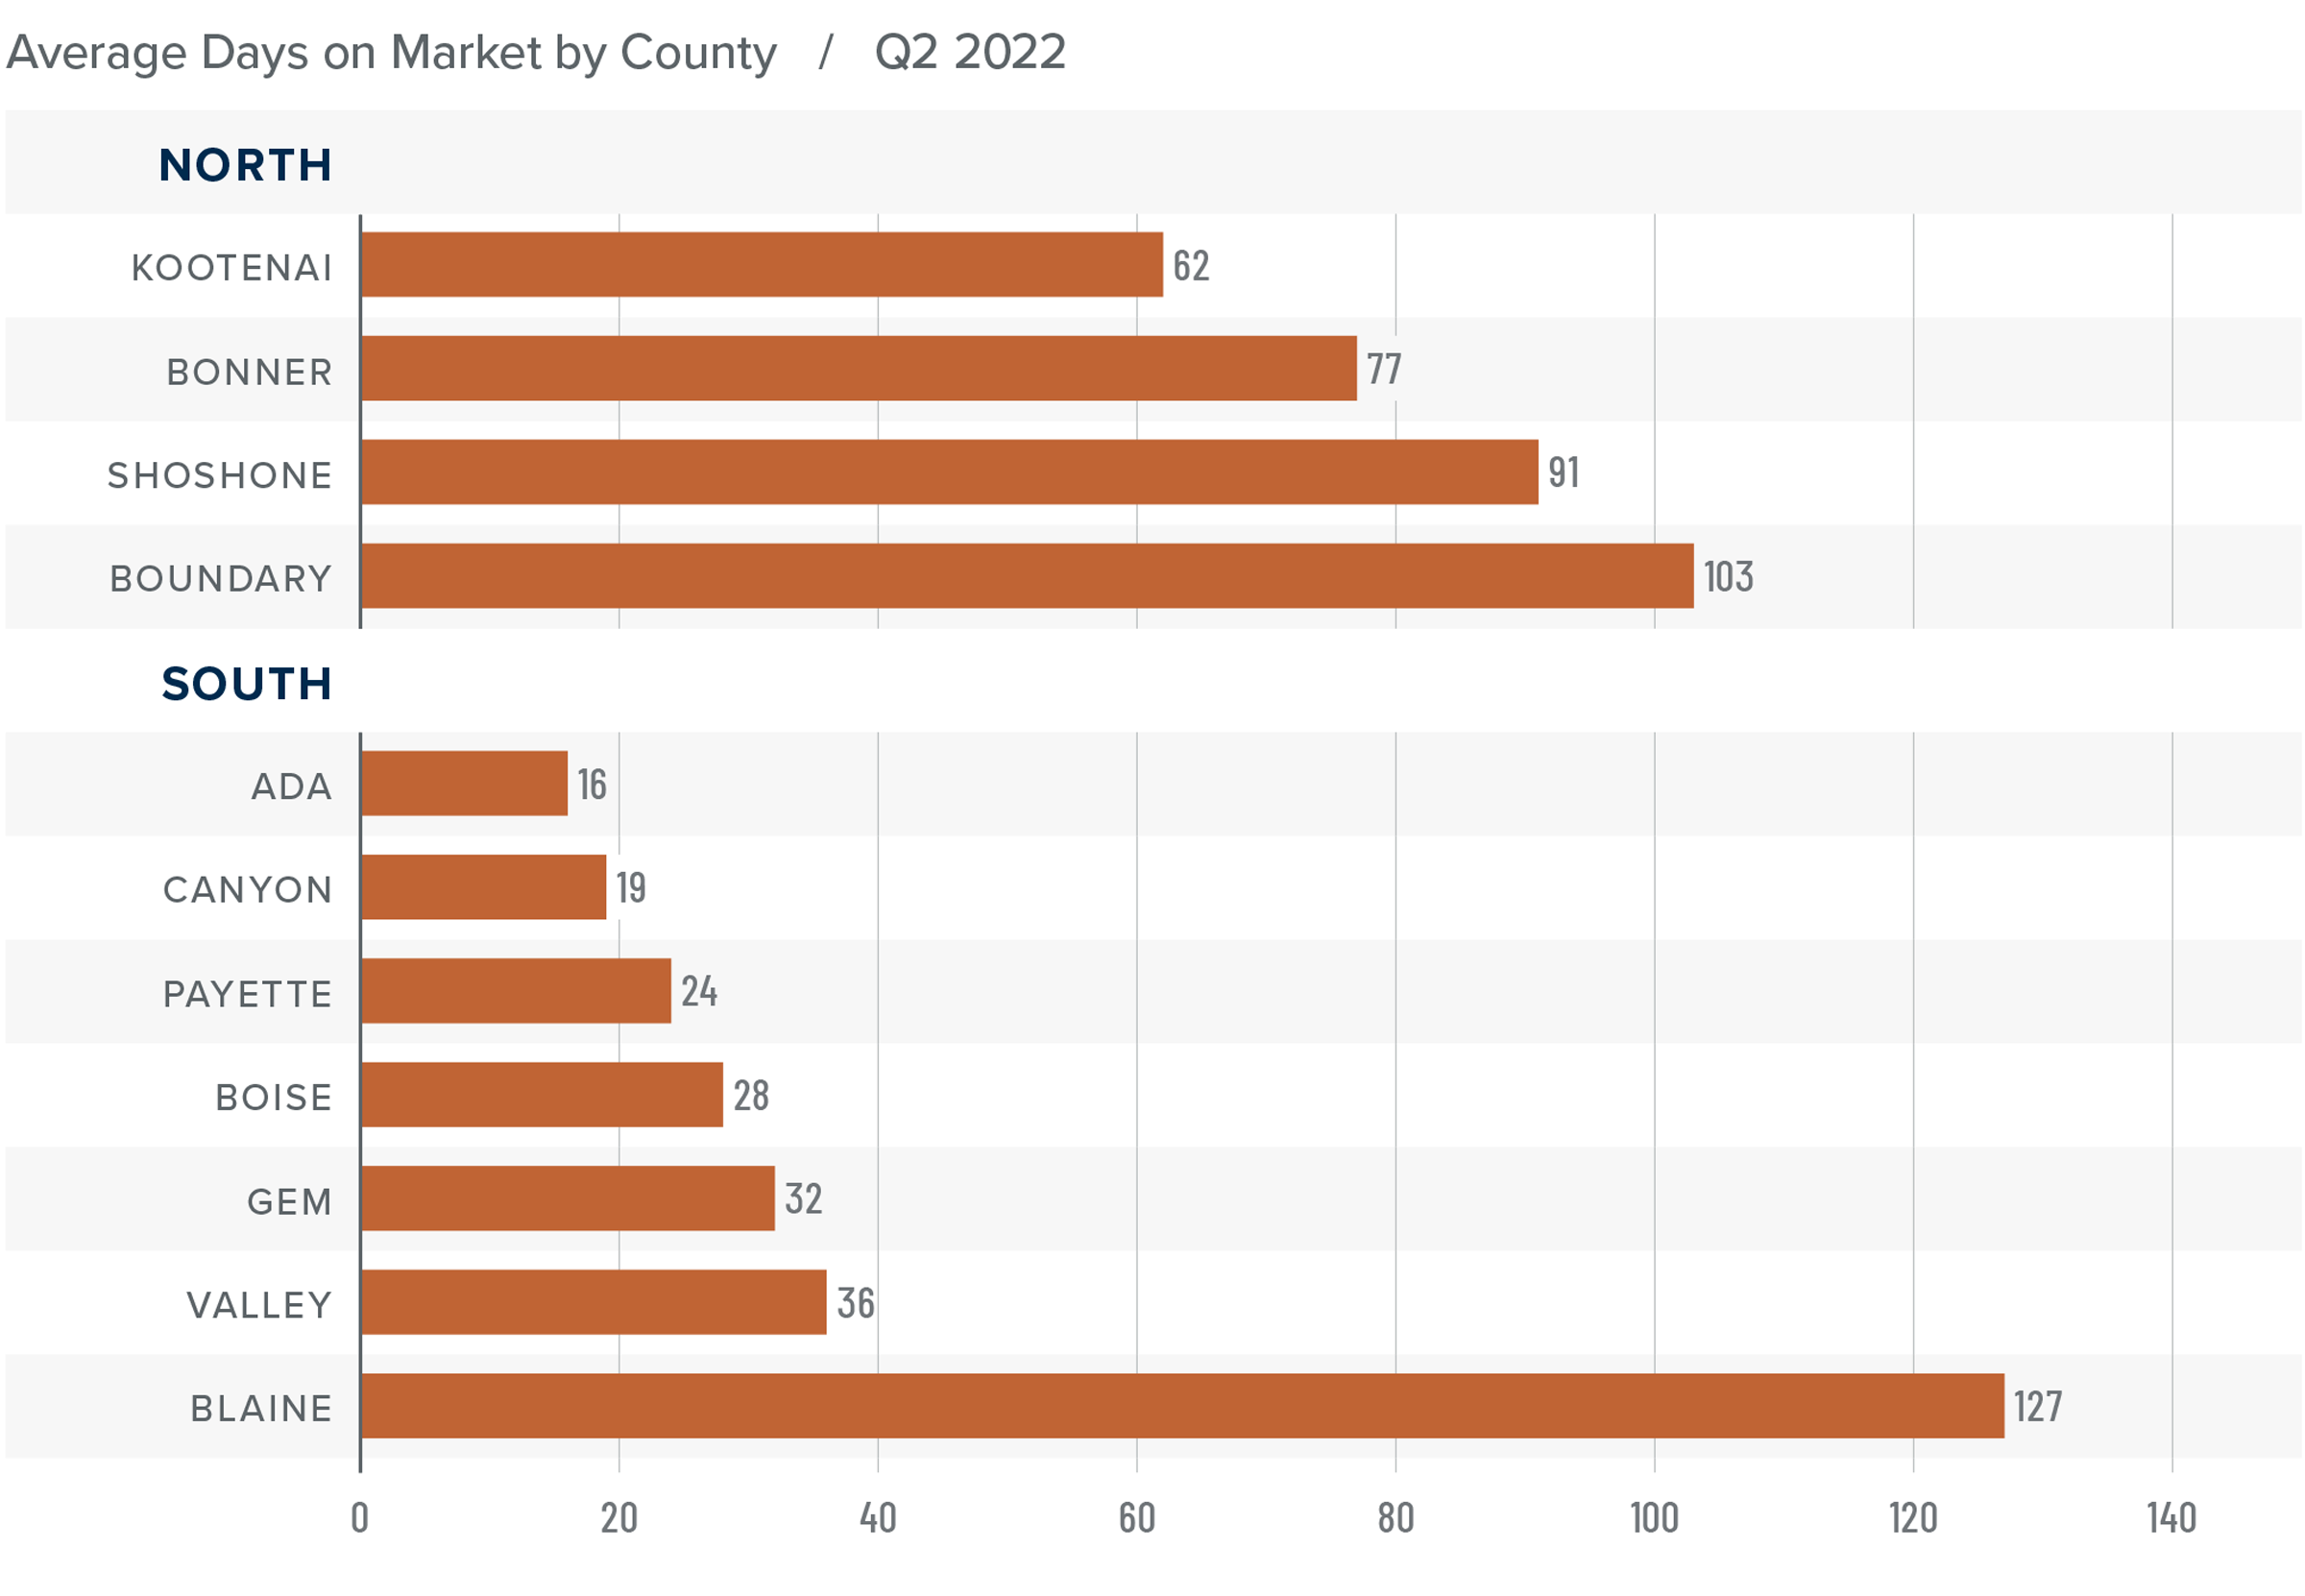 A bar graph showing the average days on market for homes in various counties in North and South Idaho for Q2 2022. In North Idaho, Kootenai County has the lowest DOM at 62, followed by Bonner at 77, Shoshone at 91, and Boundary at 103. in South Idaho, Ada County had the lowest DOM at 16, followed by Canyon at 19, Payette at 24, Boise at 28, Gem at 32, Valley at 36, and Blaine at 127.